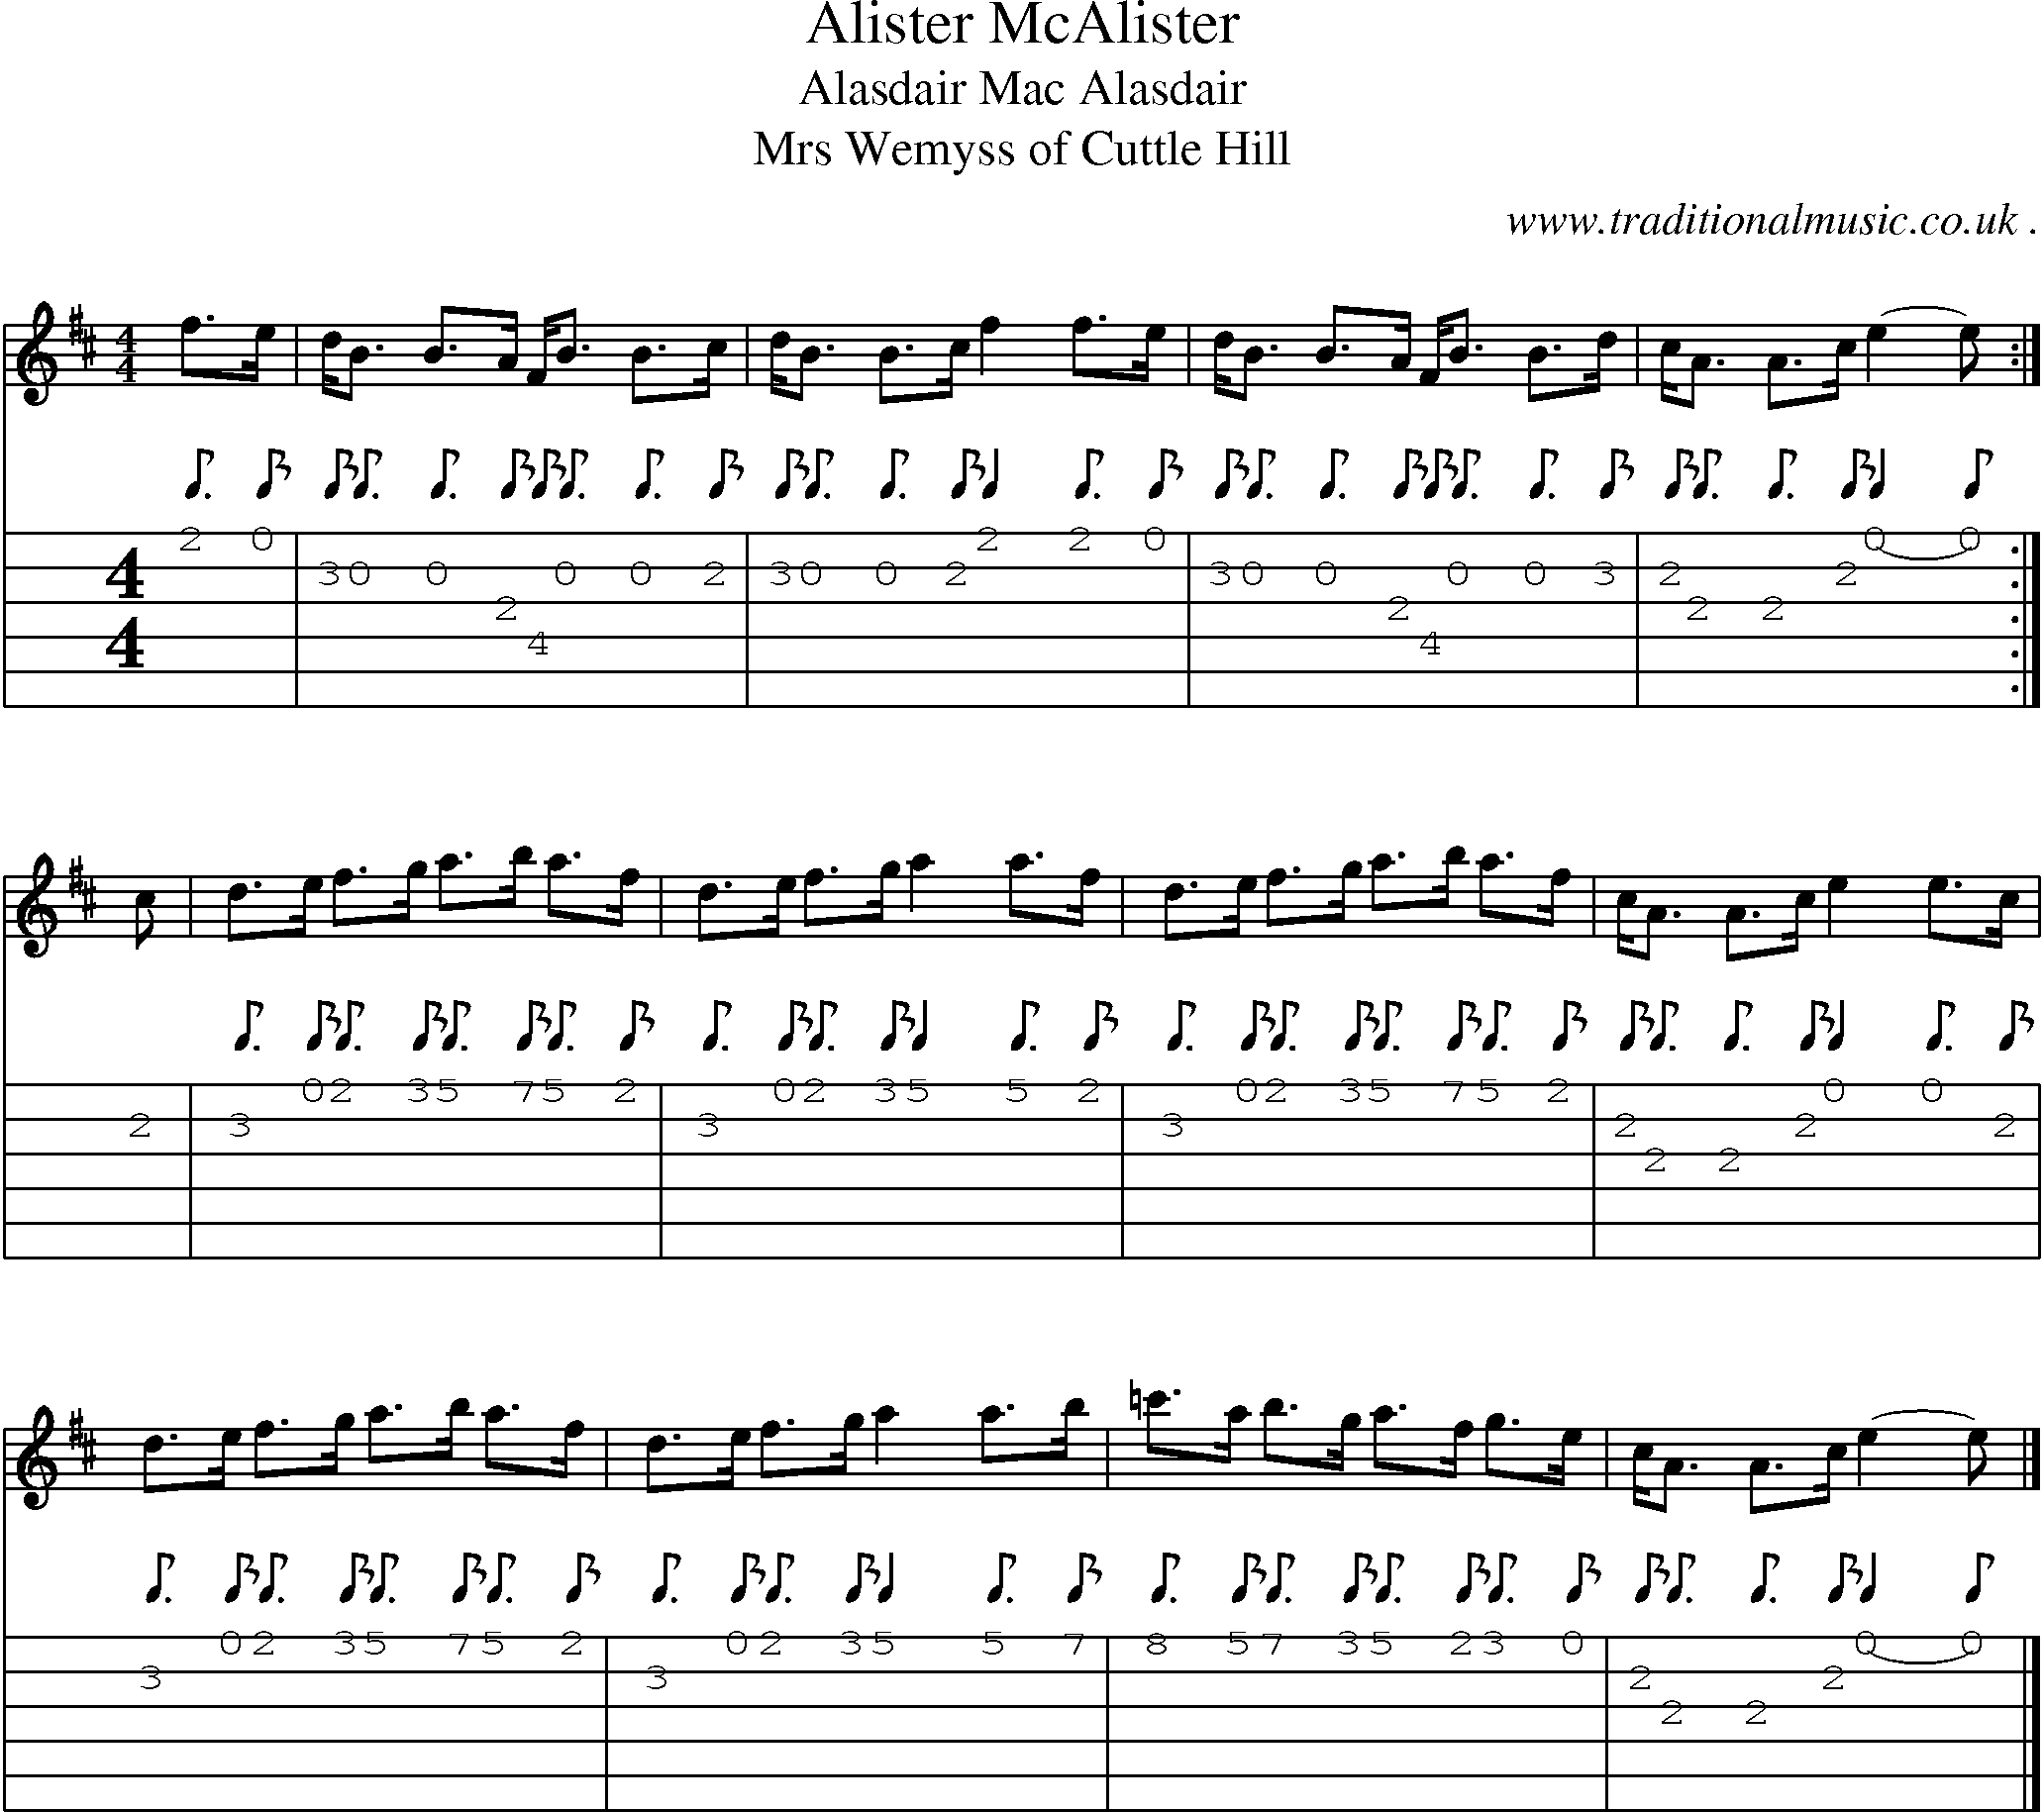 Sheet-music  score, Chords and Guitar Tabs for Alister Mcalister